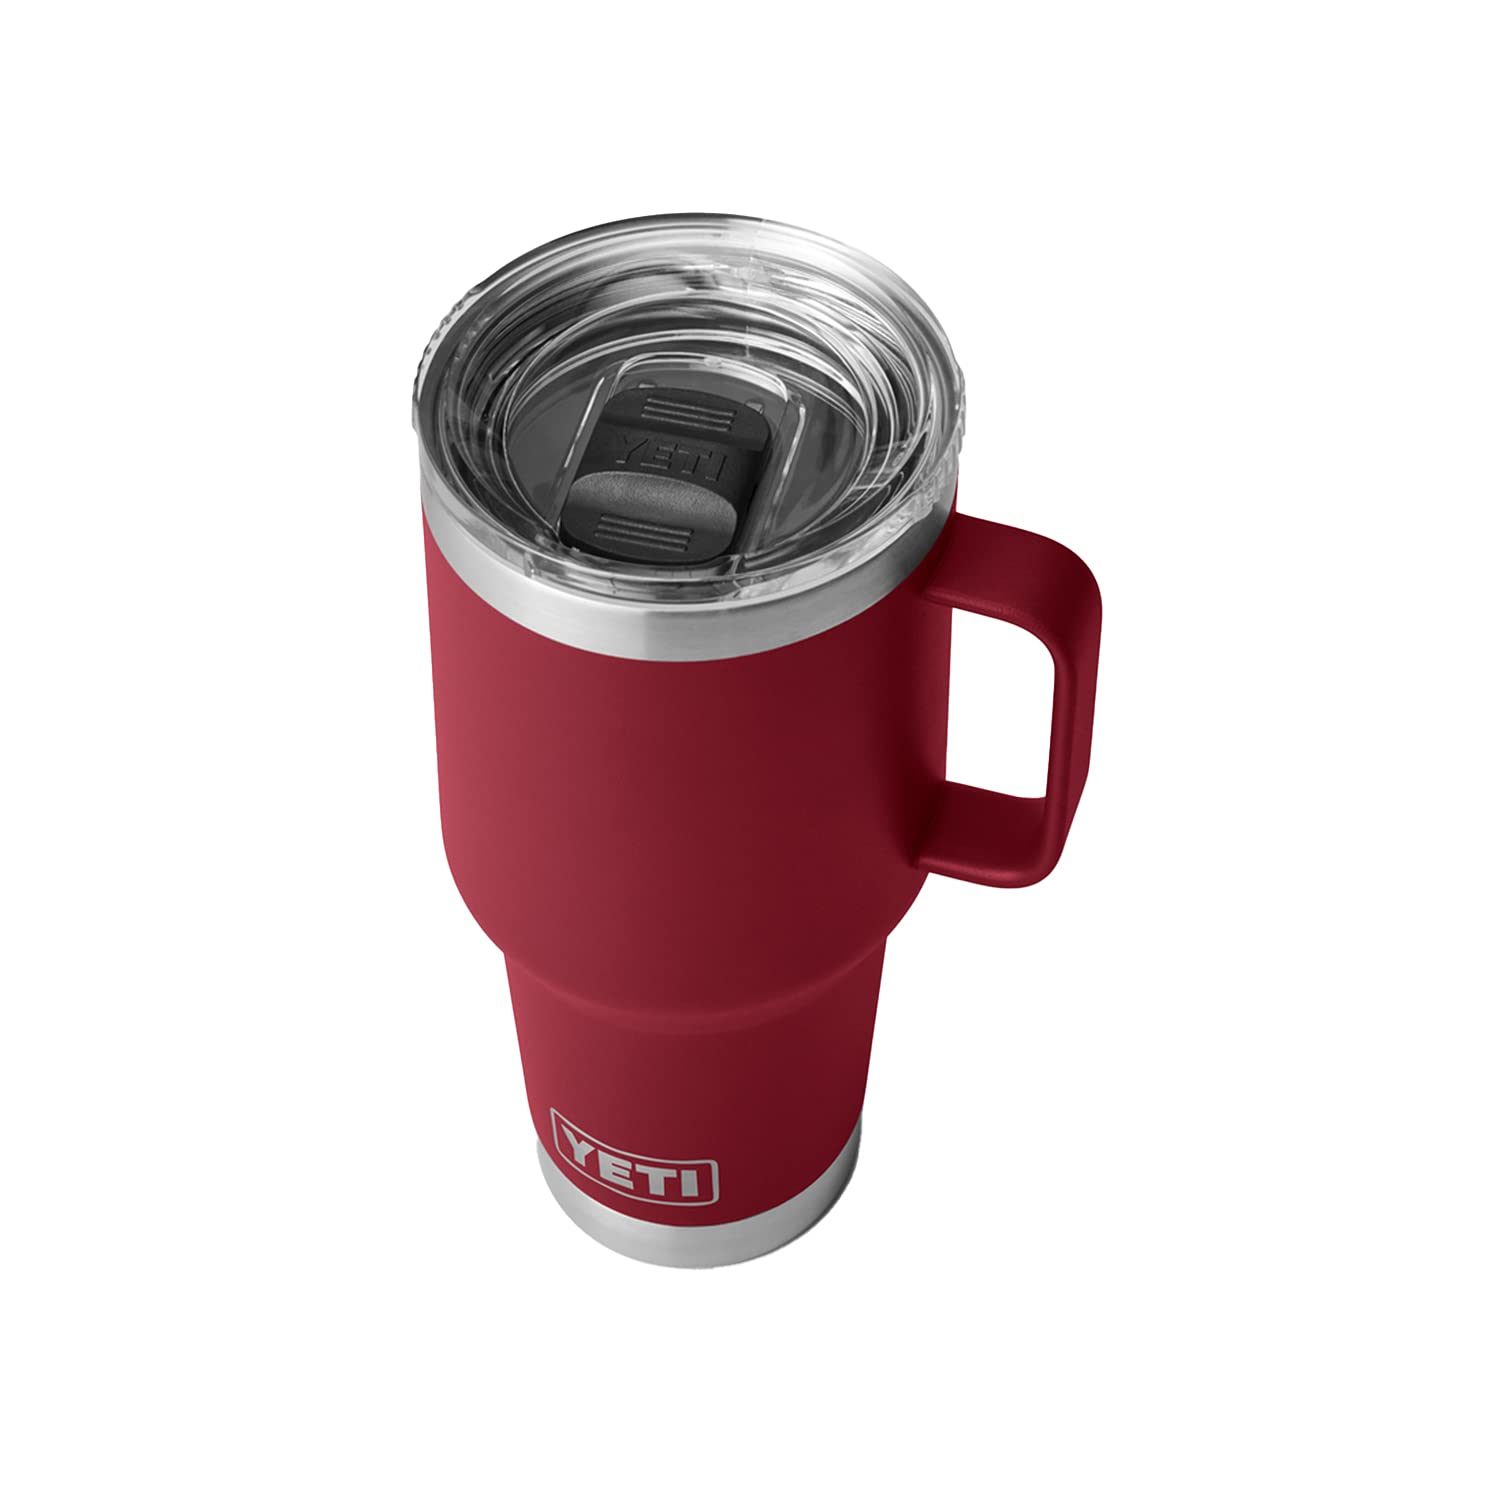 YETI Rambler 30 oz Travel Mug Stainless Steel Vacuum Insulated with Stronghold Lid Harvest Red並行輸入品